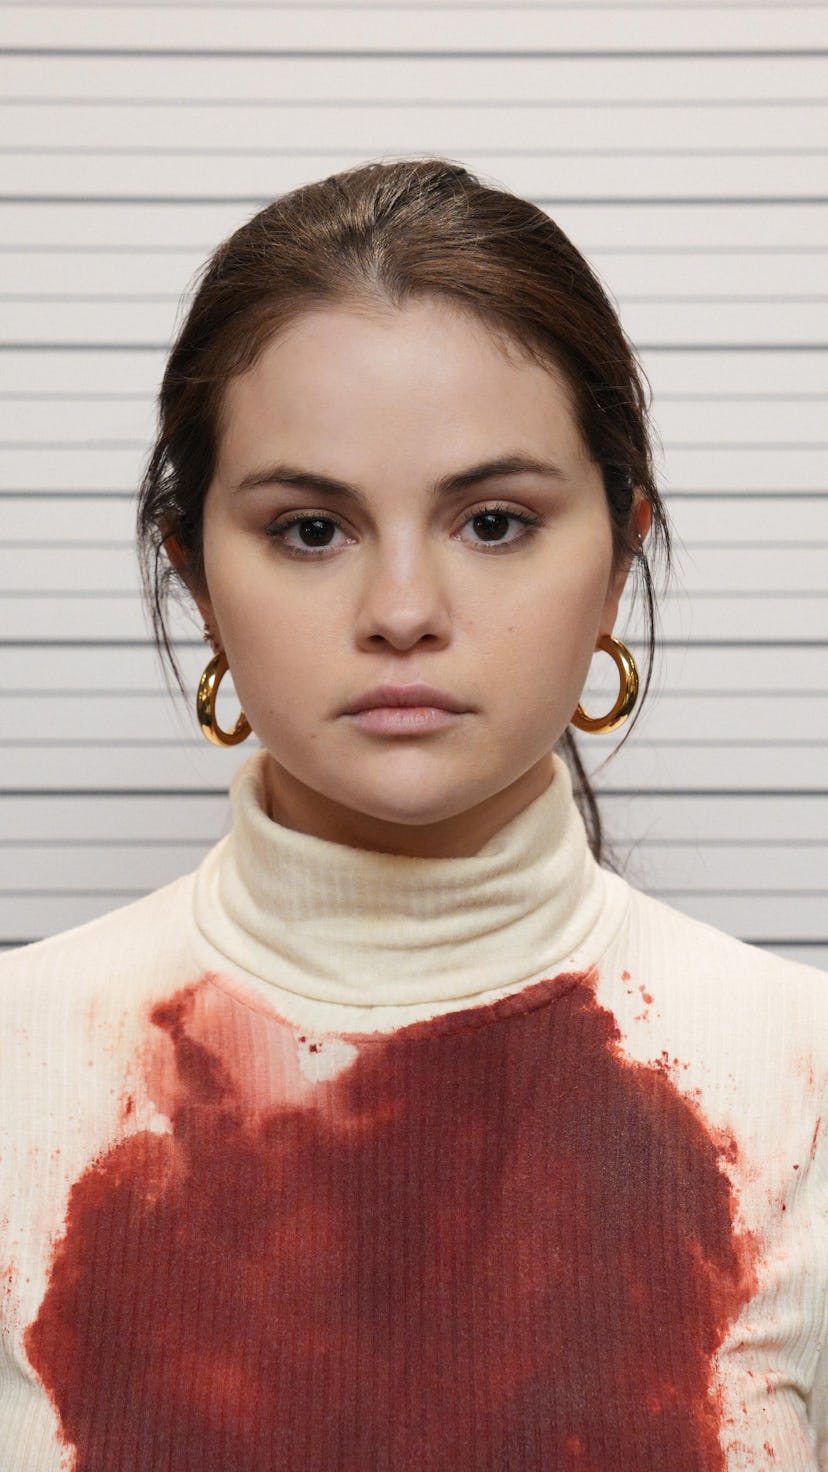 Selena Gomez as Mabel in Only Murders In the Building.